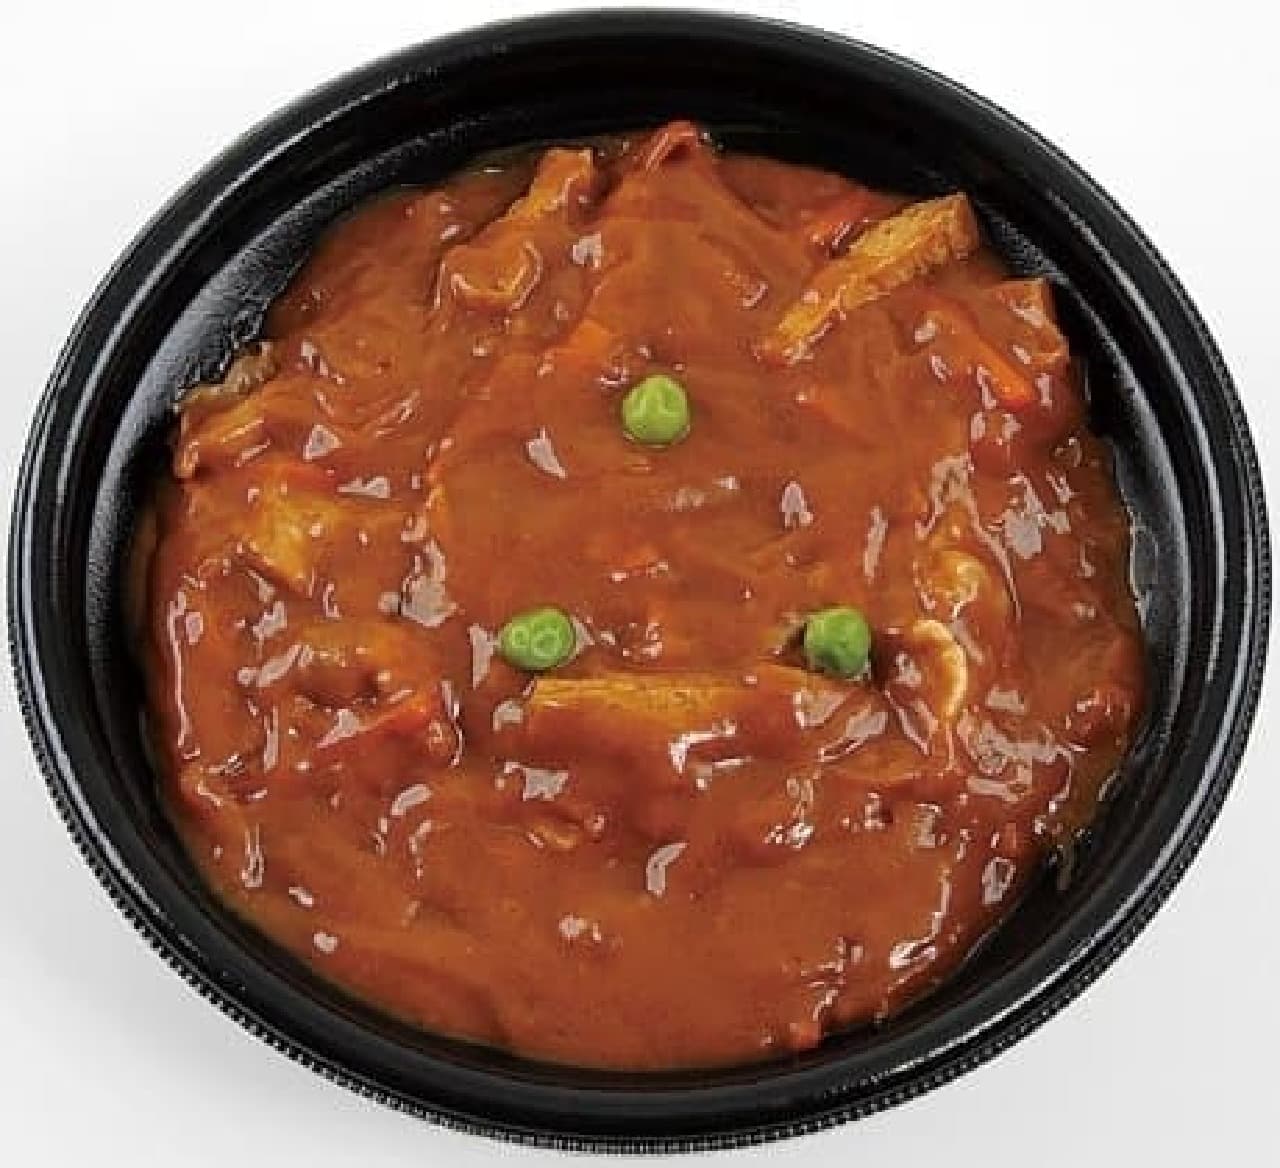 Ministop Kanto area limited "Japanese style curry bowl"